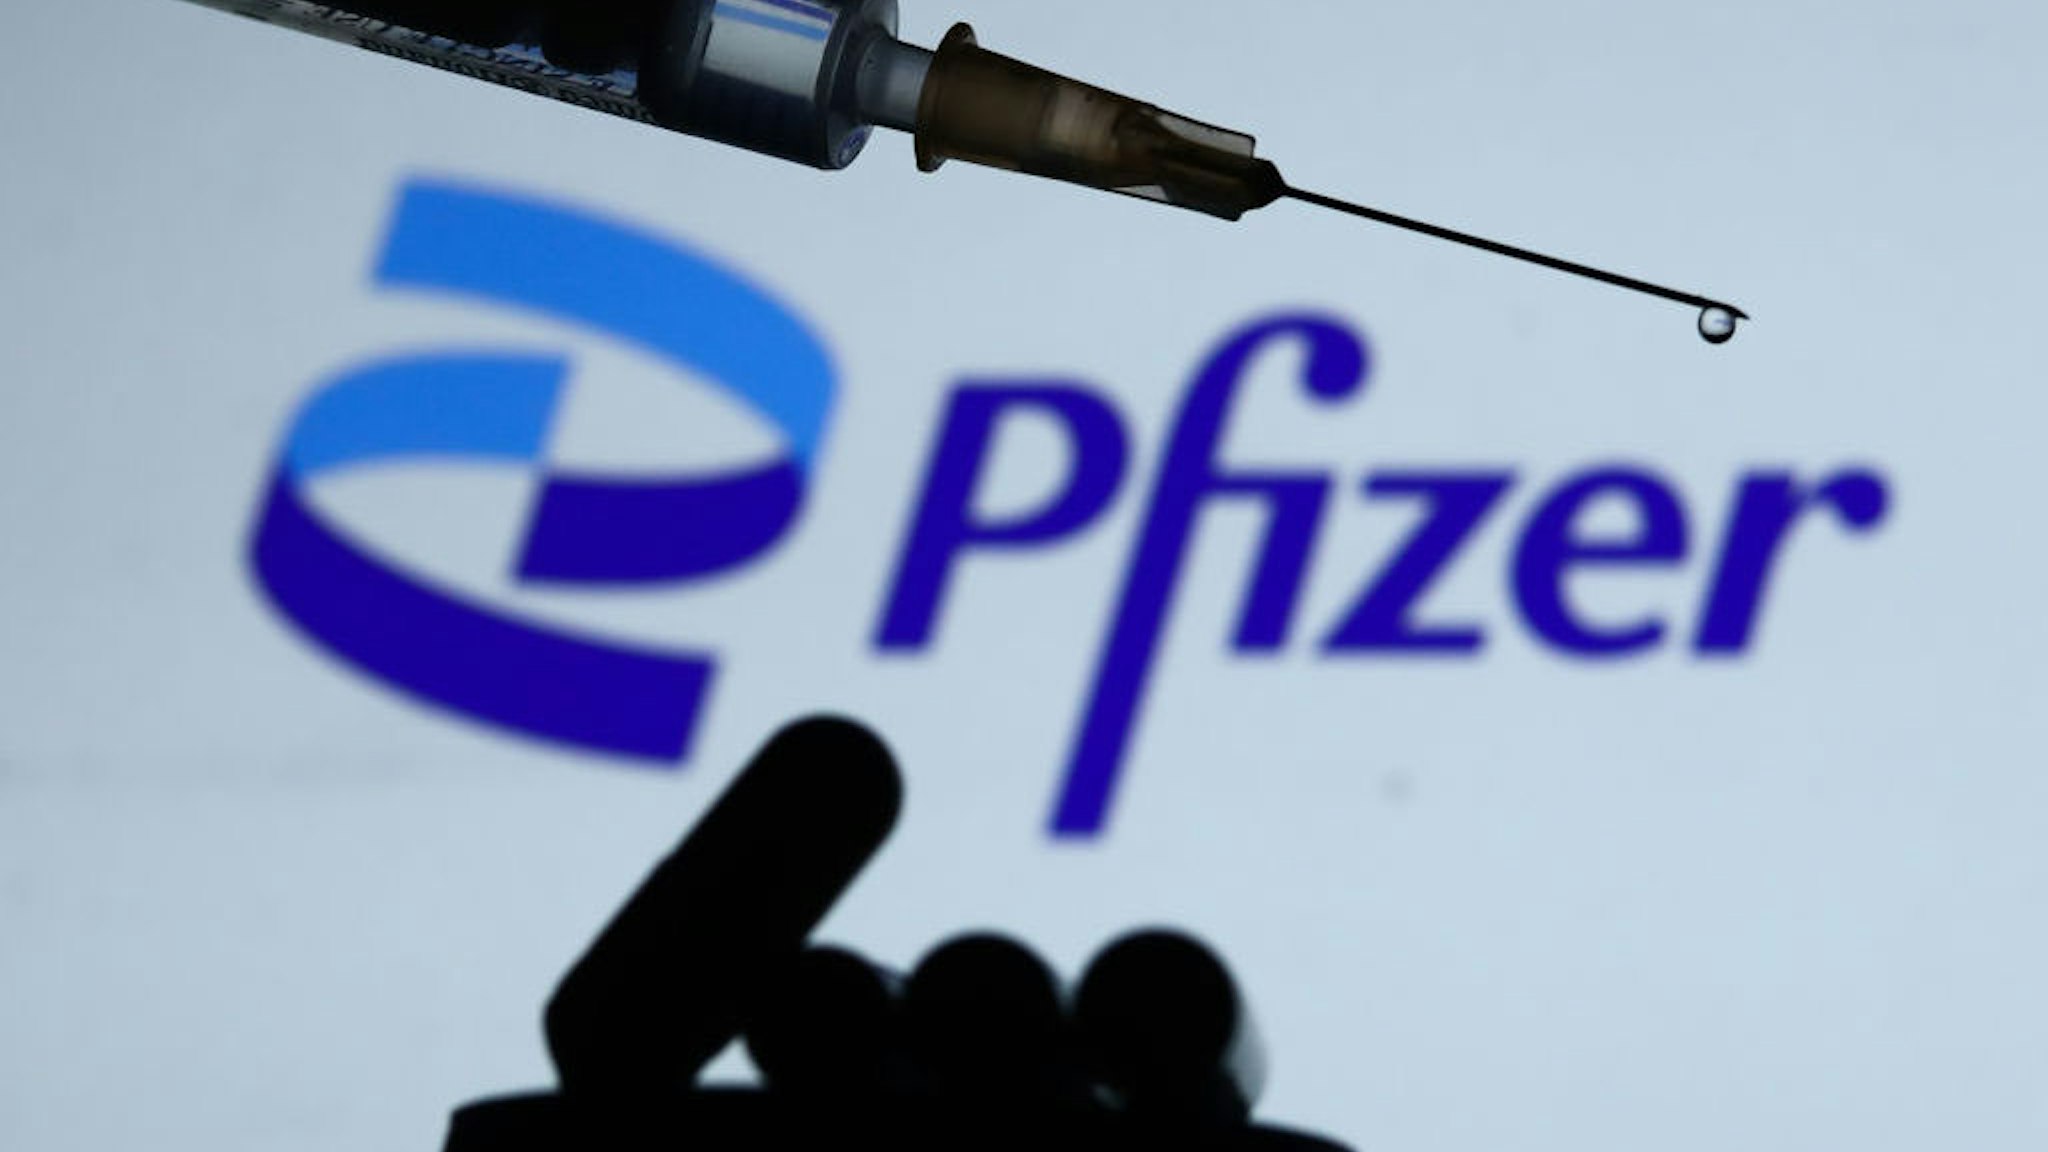 Medical syringe and medicine pills are seen with Pfizer logo in the background in this illustration photo taken in Krakow, Poland on December 14, 2021. (Photo by Jakub Porzycki/NurPhoto via Getty Images)